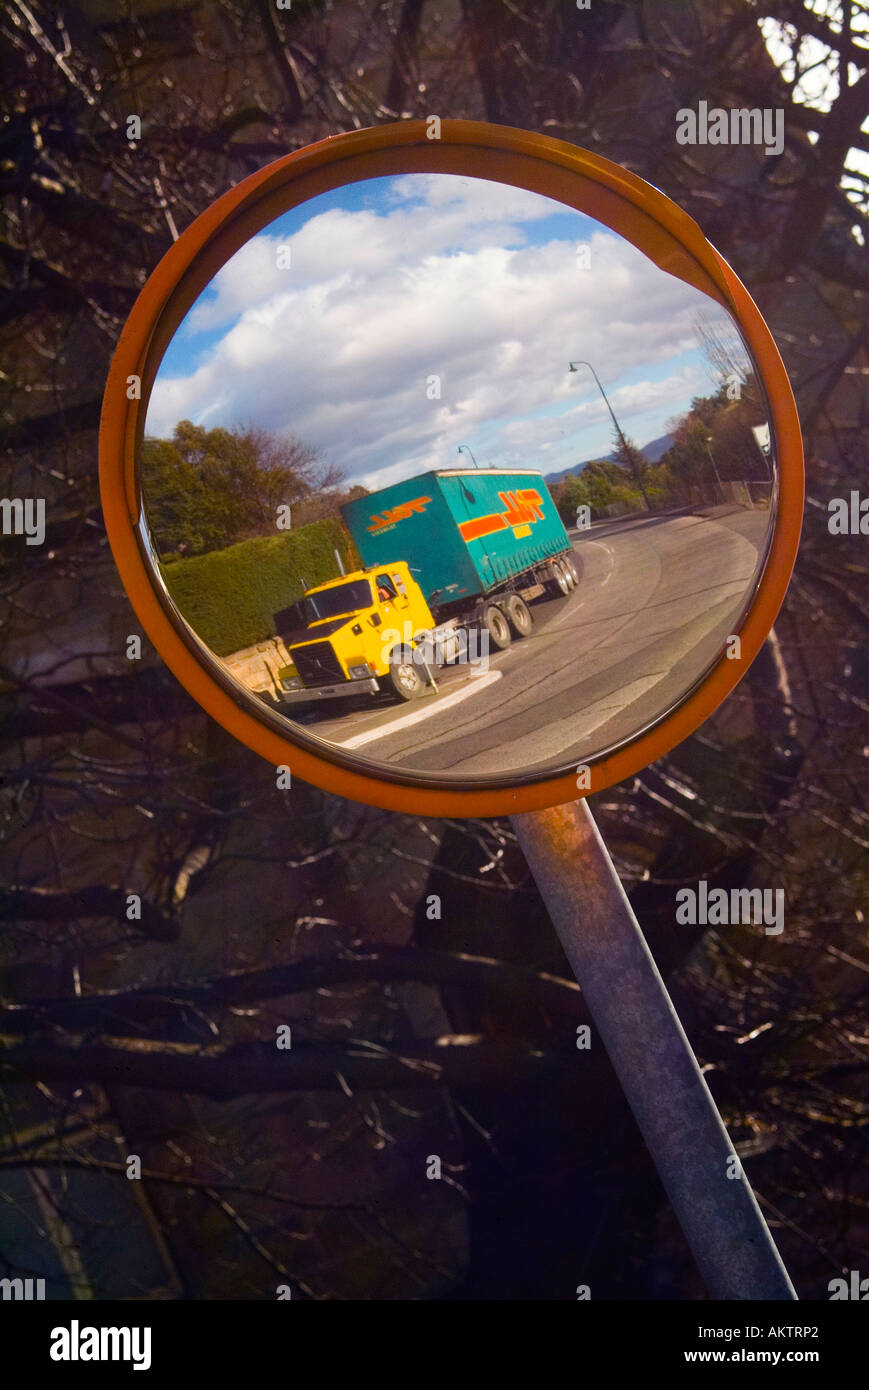 A loaded truck reflected in a convex mirror used to see around a blind corner Stock Photo